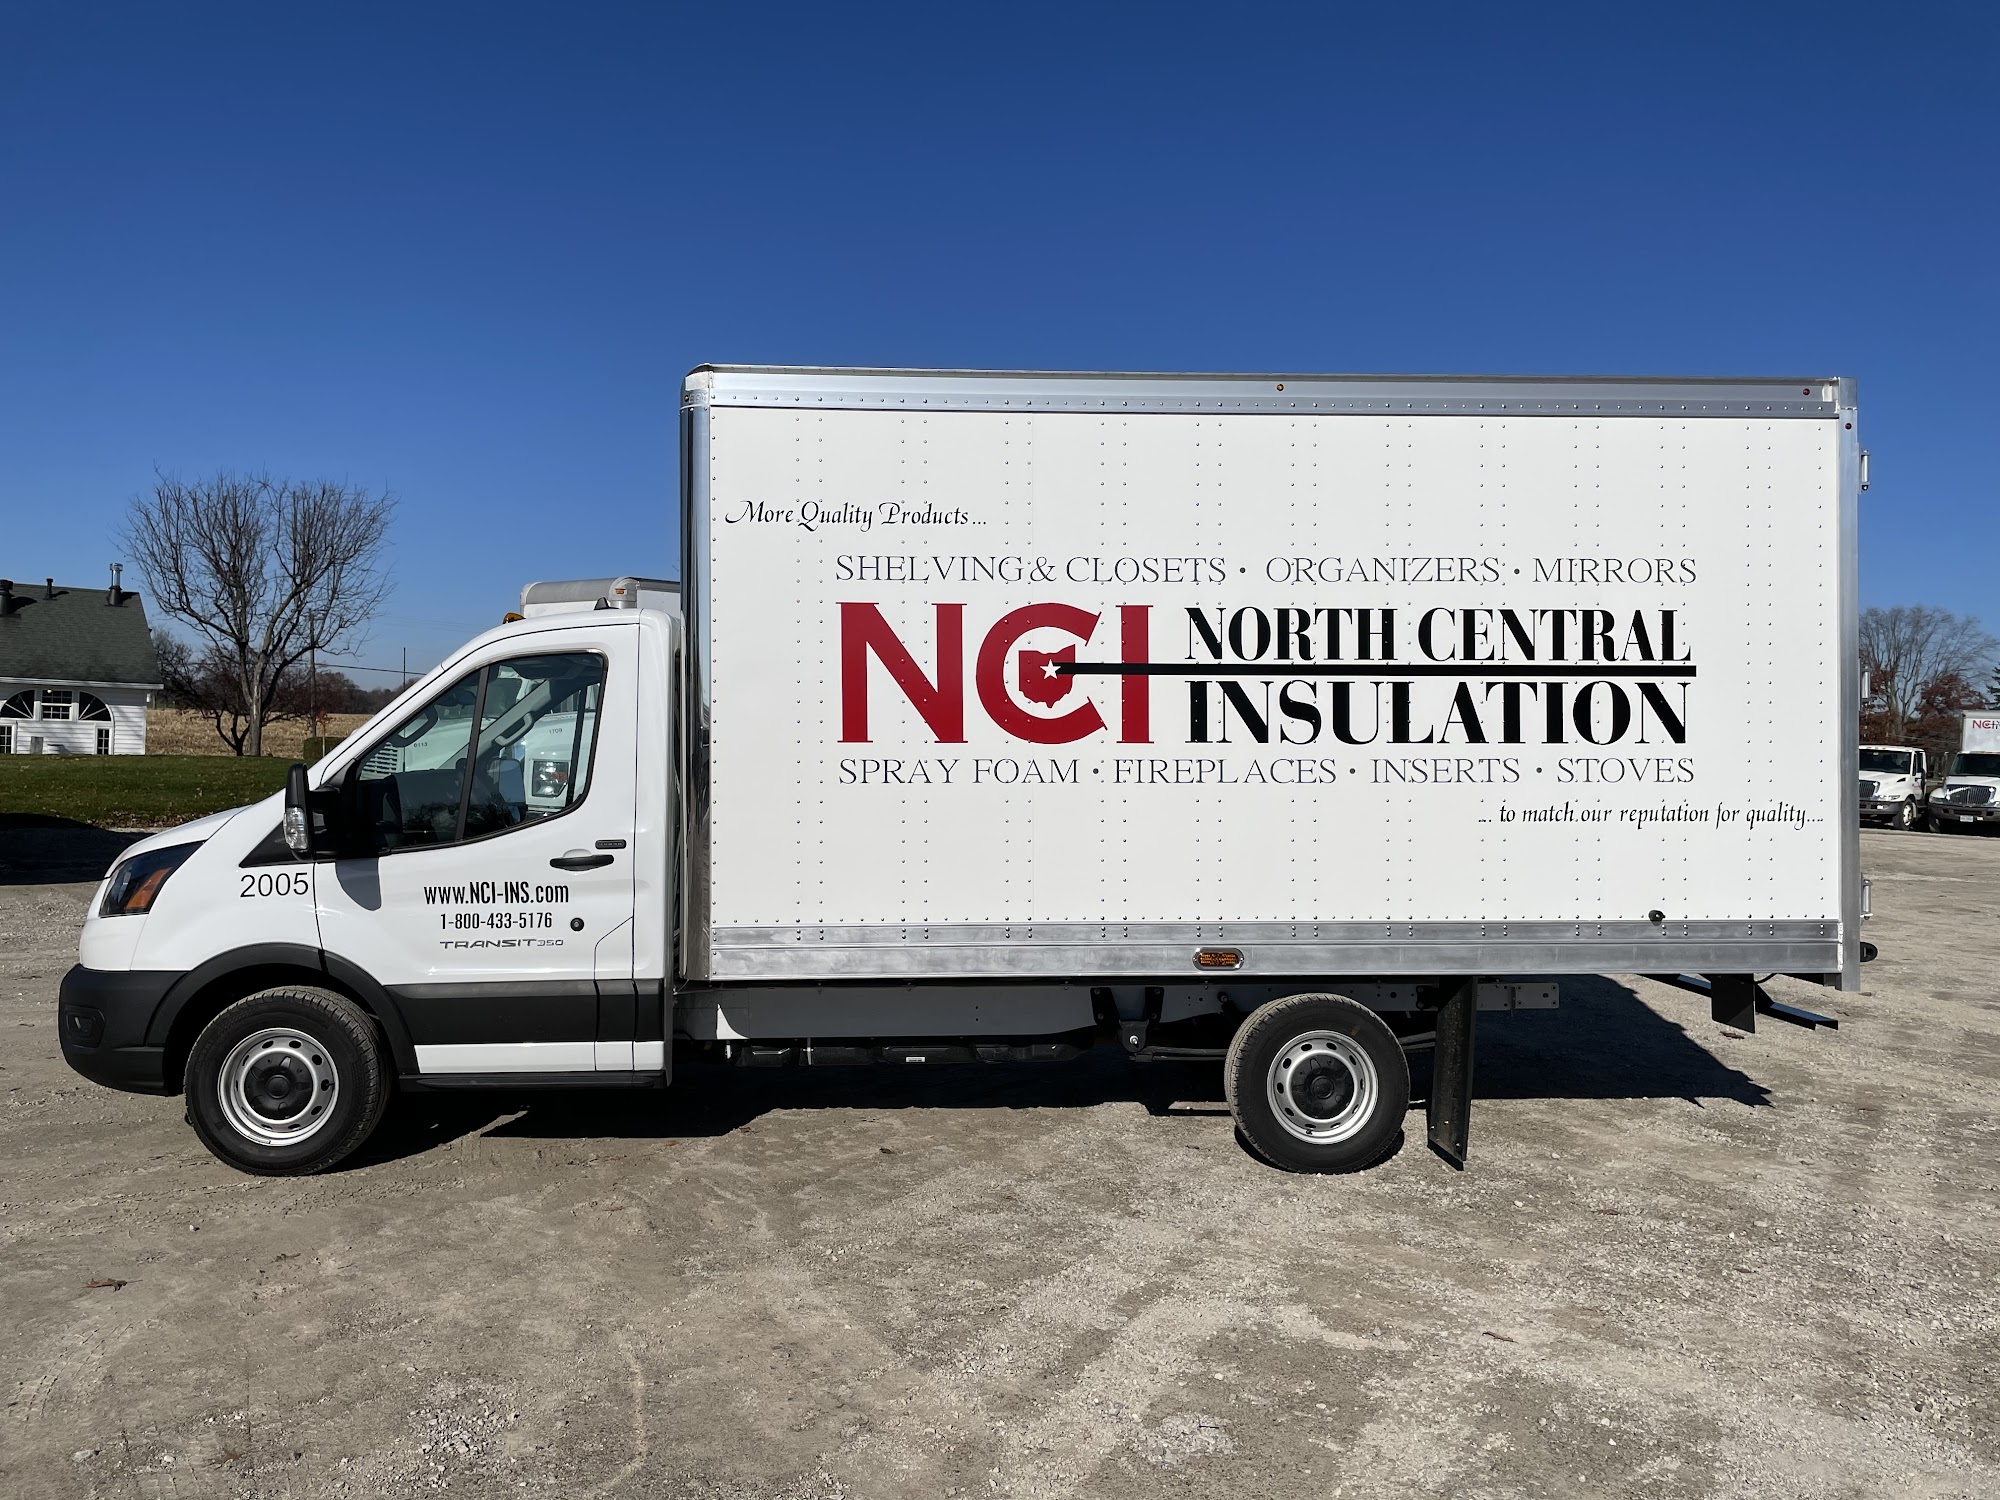 North Central Insulation 7539 OH-13, Bellville Ohio 44813